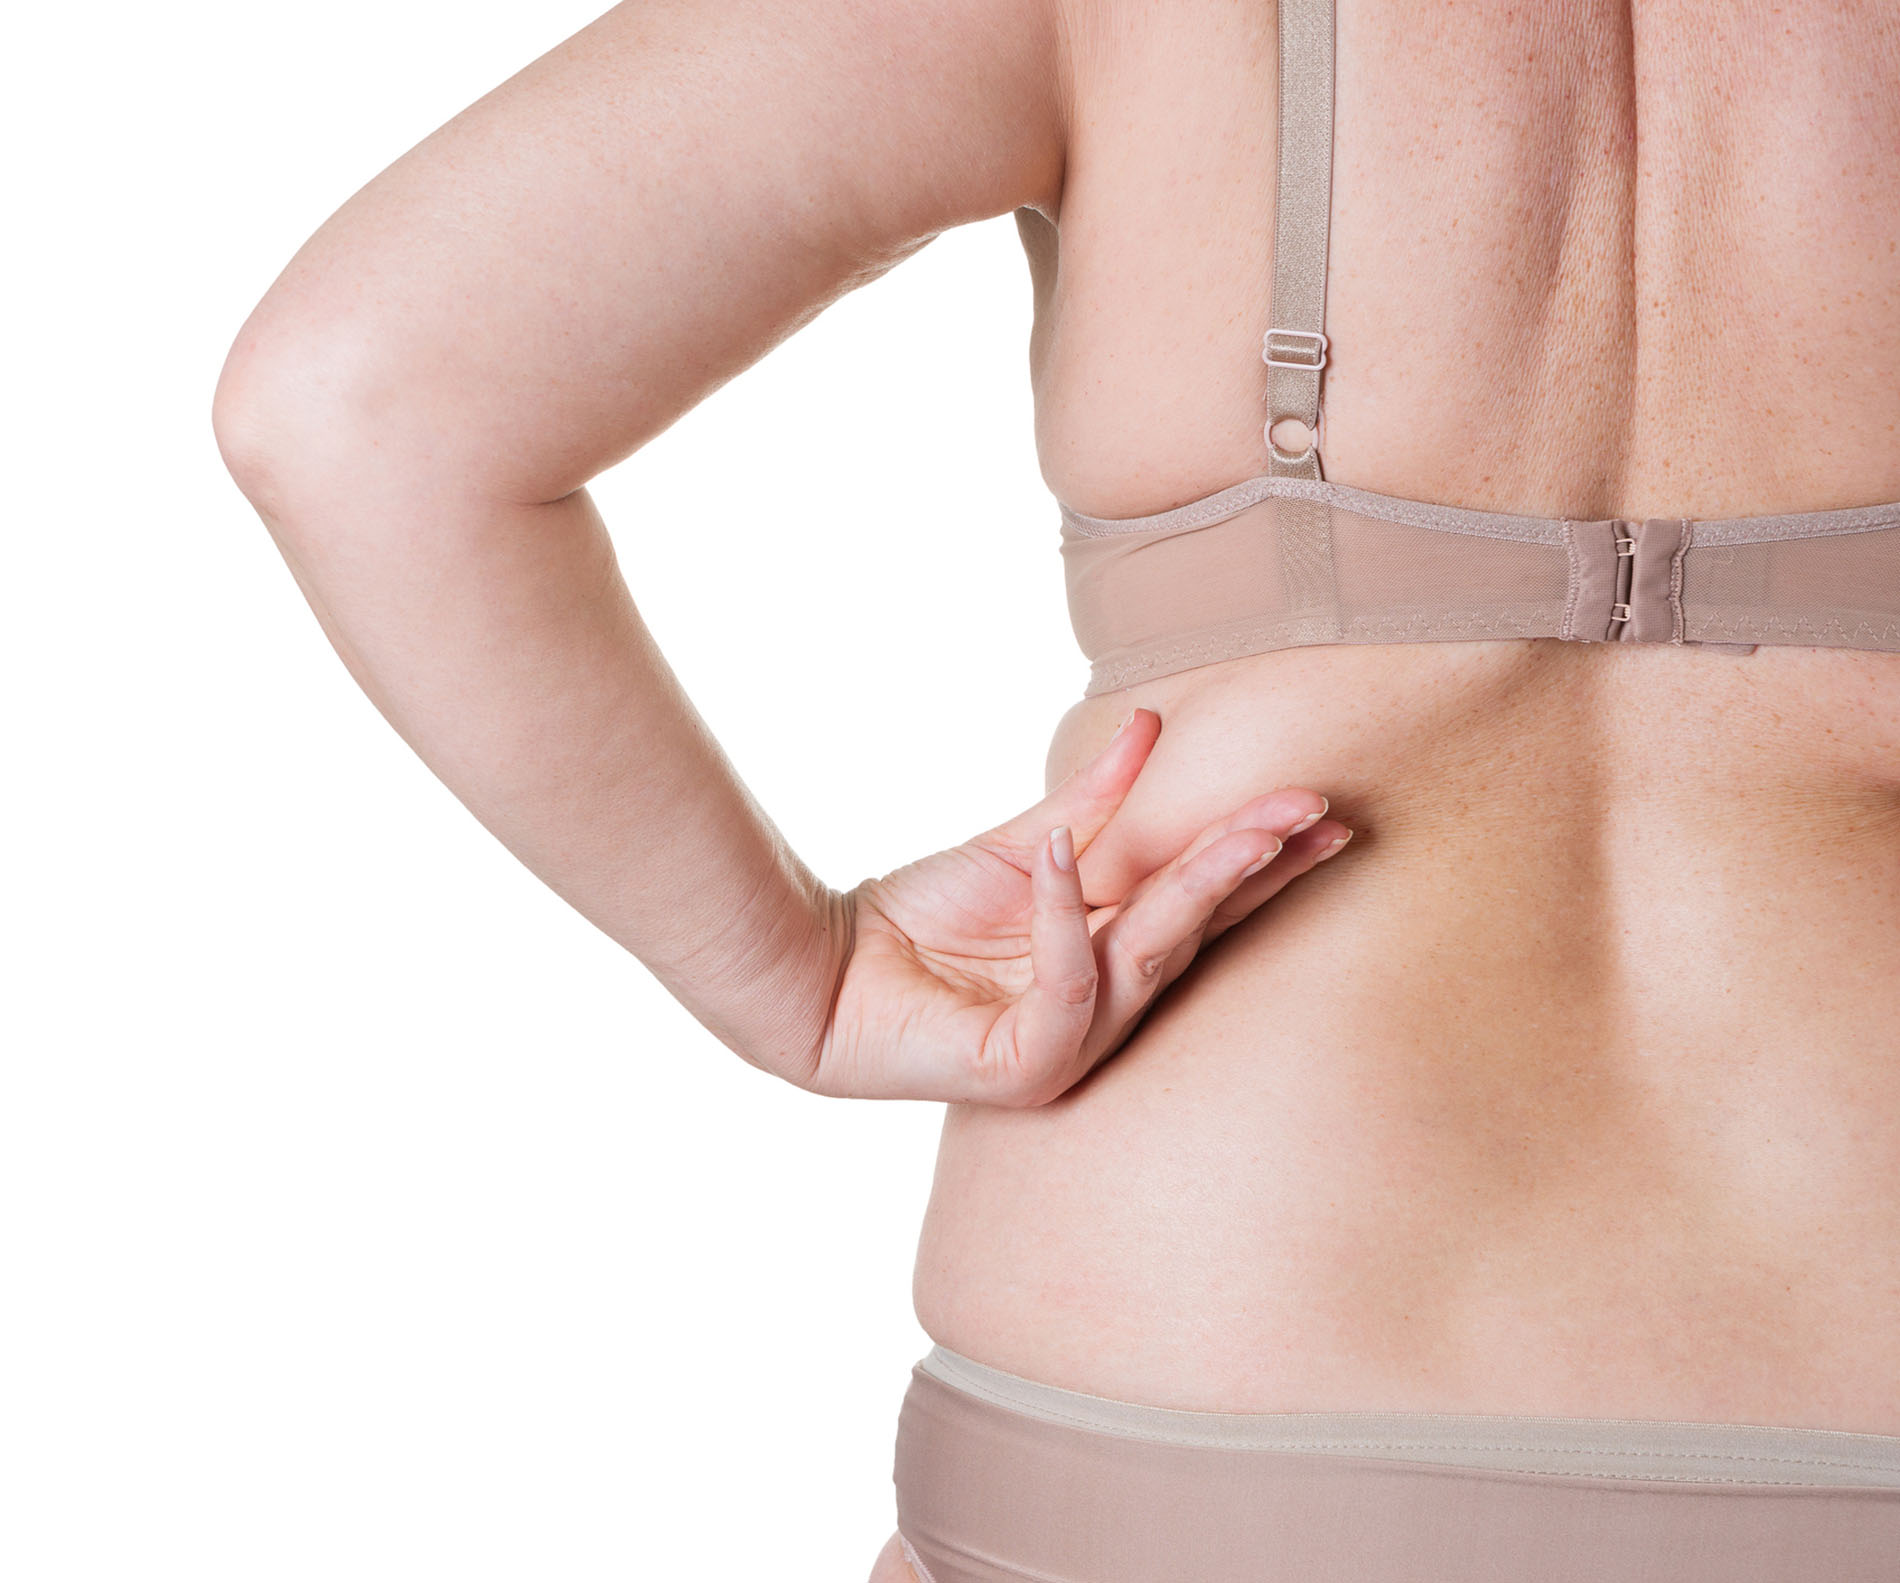 Treating Bra Fat, Skin Conditions & Skin Concerns